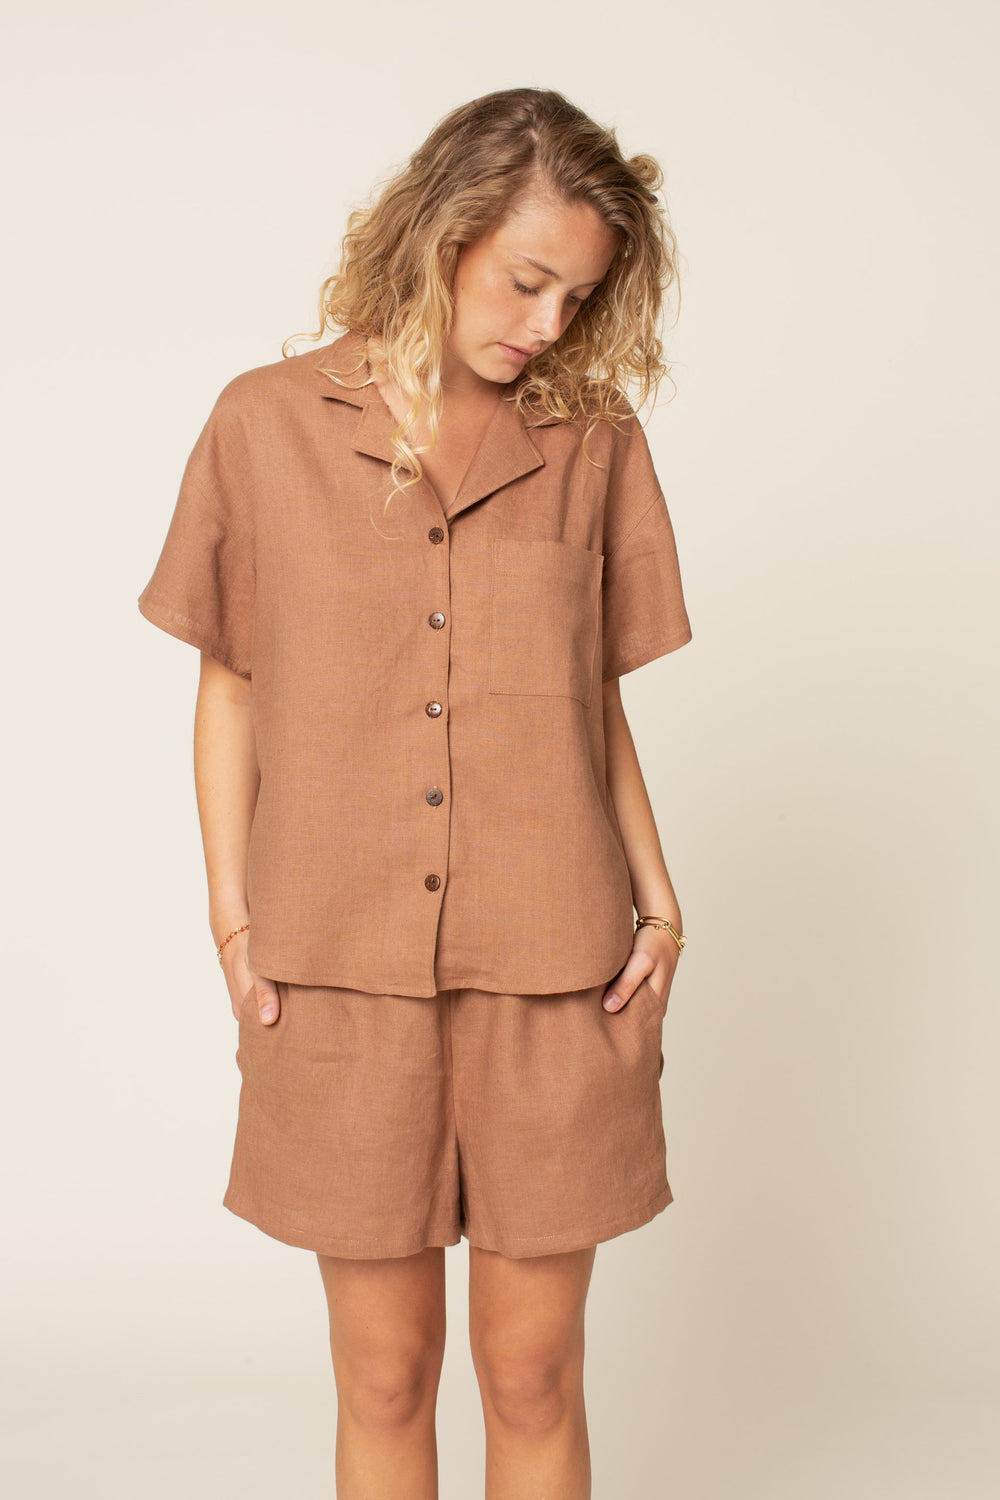 Woman wearing the Camp Shirt and Shorts sewing pattern from Wardrobe by Me on The Fold Line. A shirt and shorts pattern made in cotton, linen, viscose or silk fabrics, featuring a shirt in casual style, button front closure, convertible collar, dropped sh